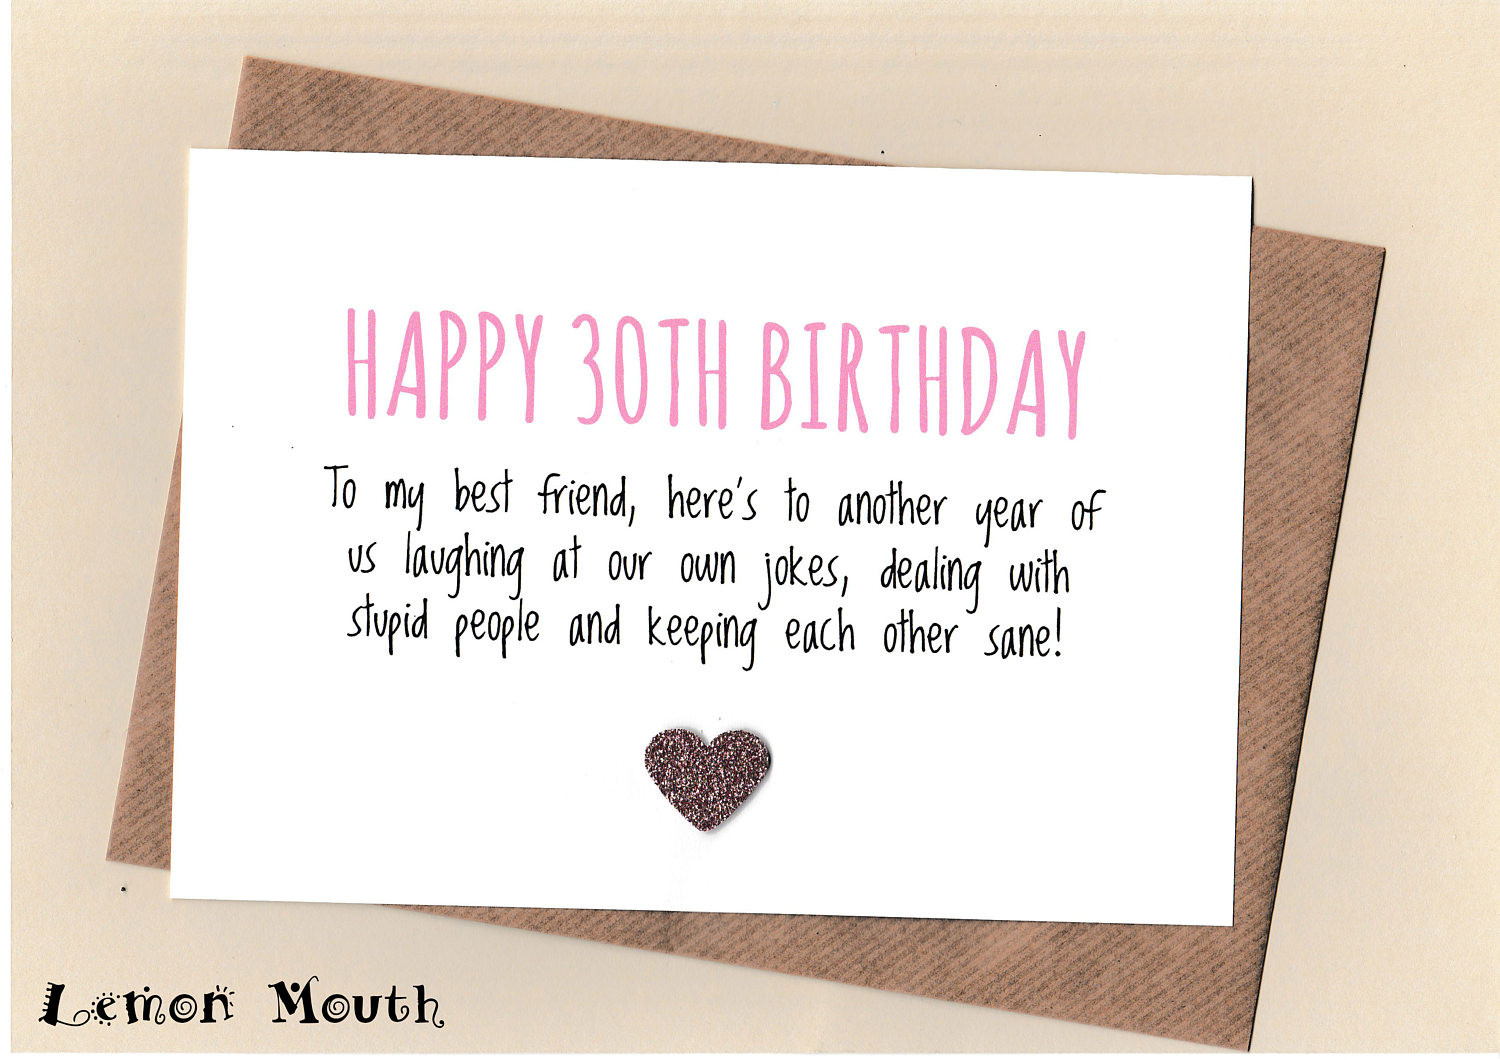 22 Of The Best Ideas For 30th Birthday Card Messages - vrogue.co